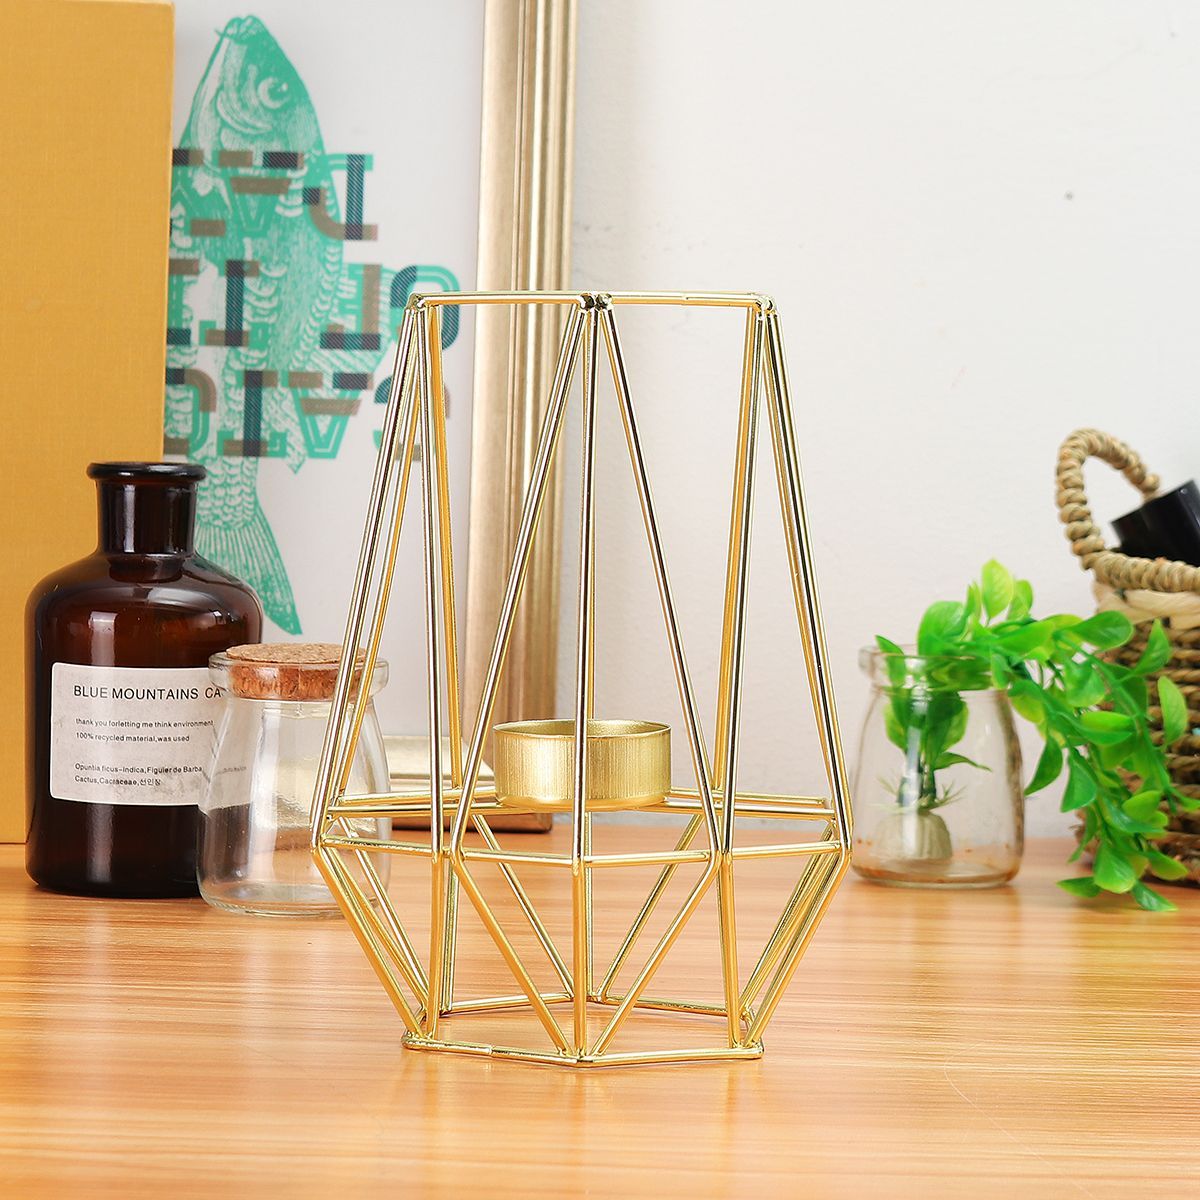 Geometric-Candlestick-Metal-Iron-Candle-Holder-Wedding-Home-Decorations-Nordic-Style-1493157